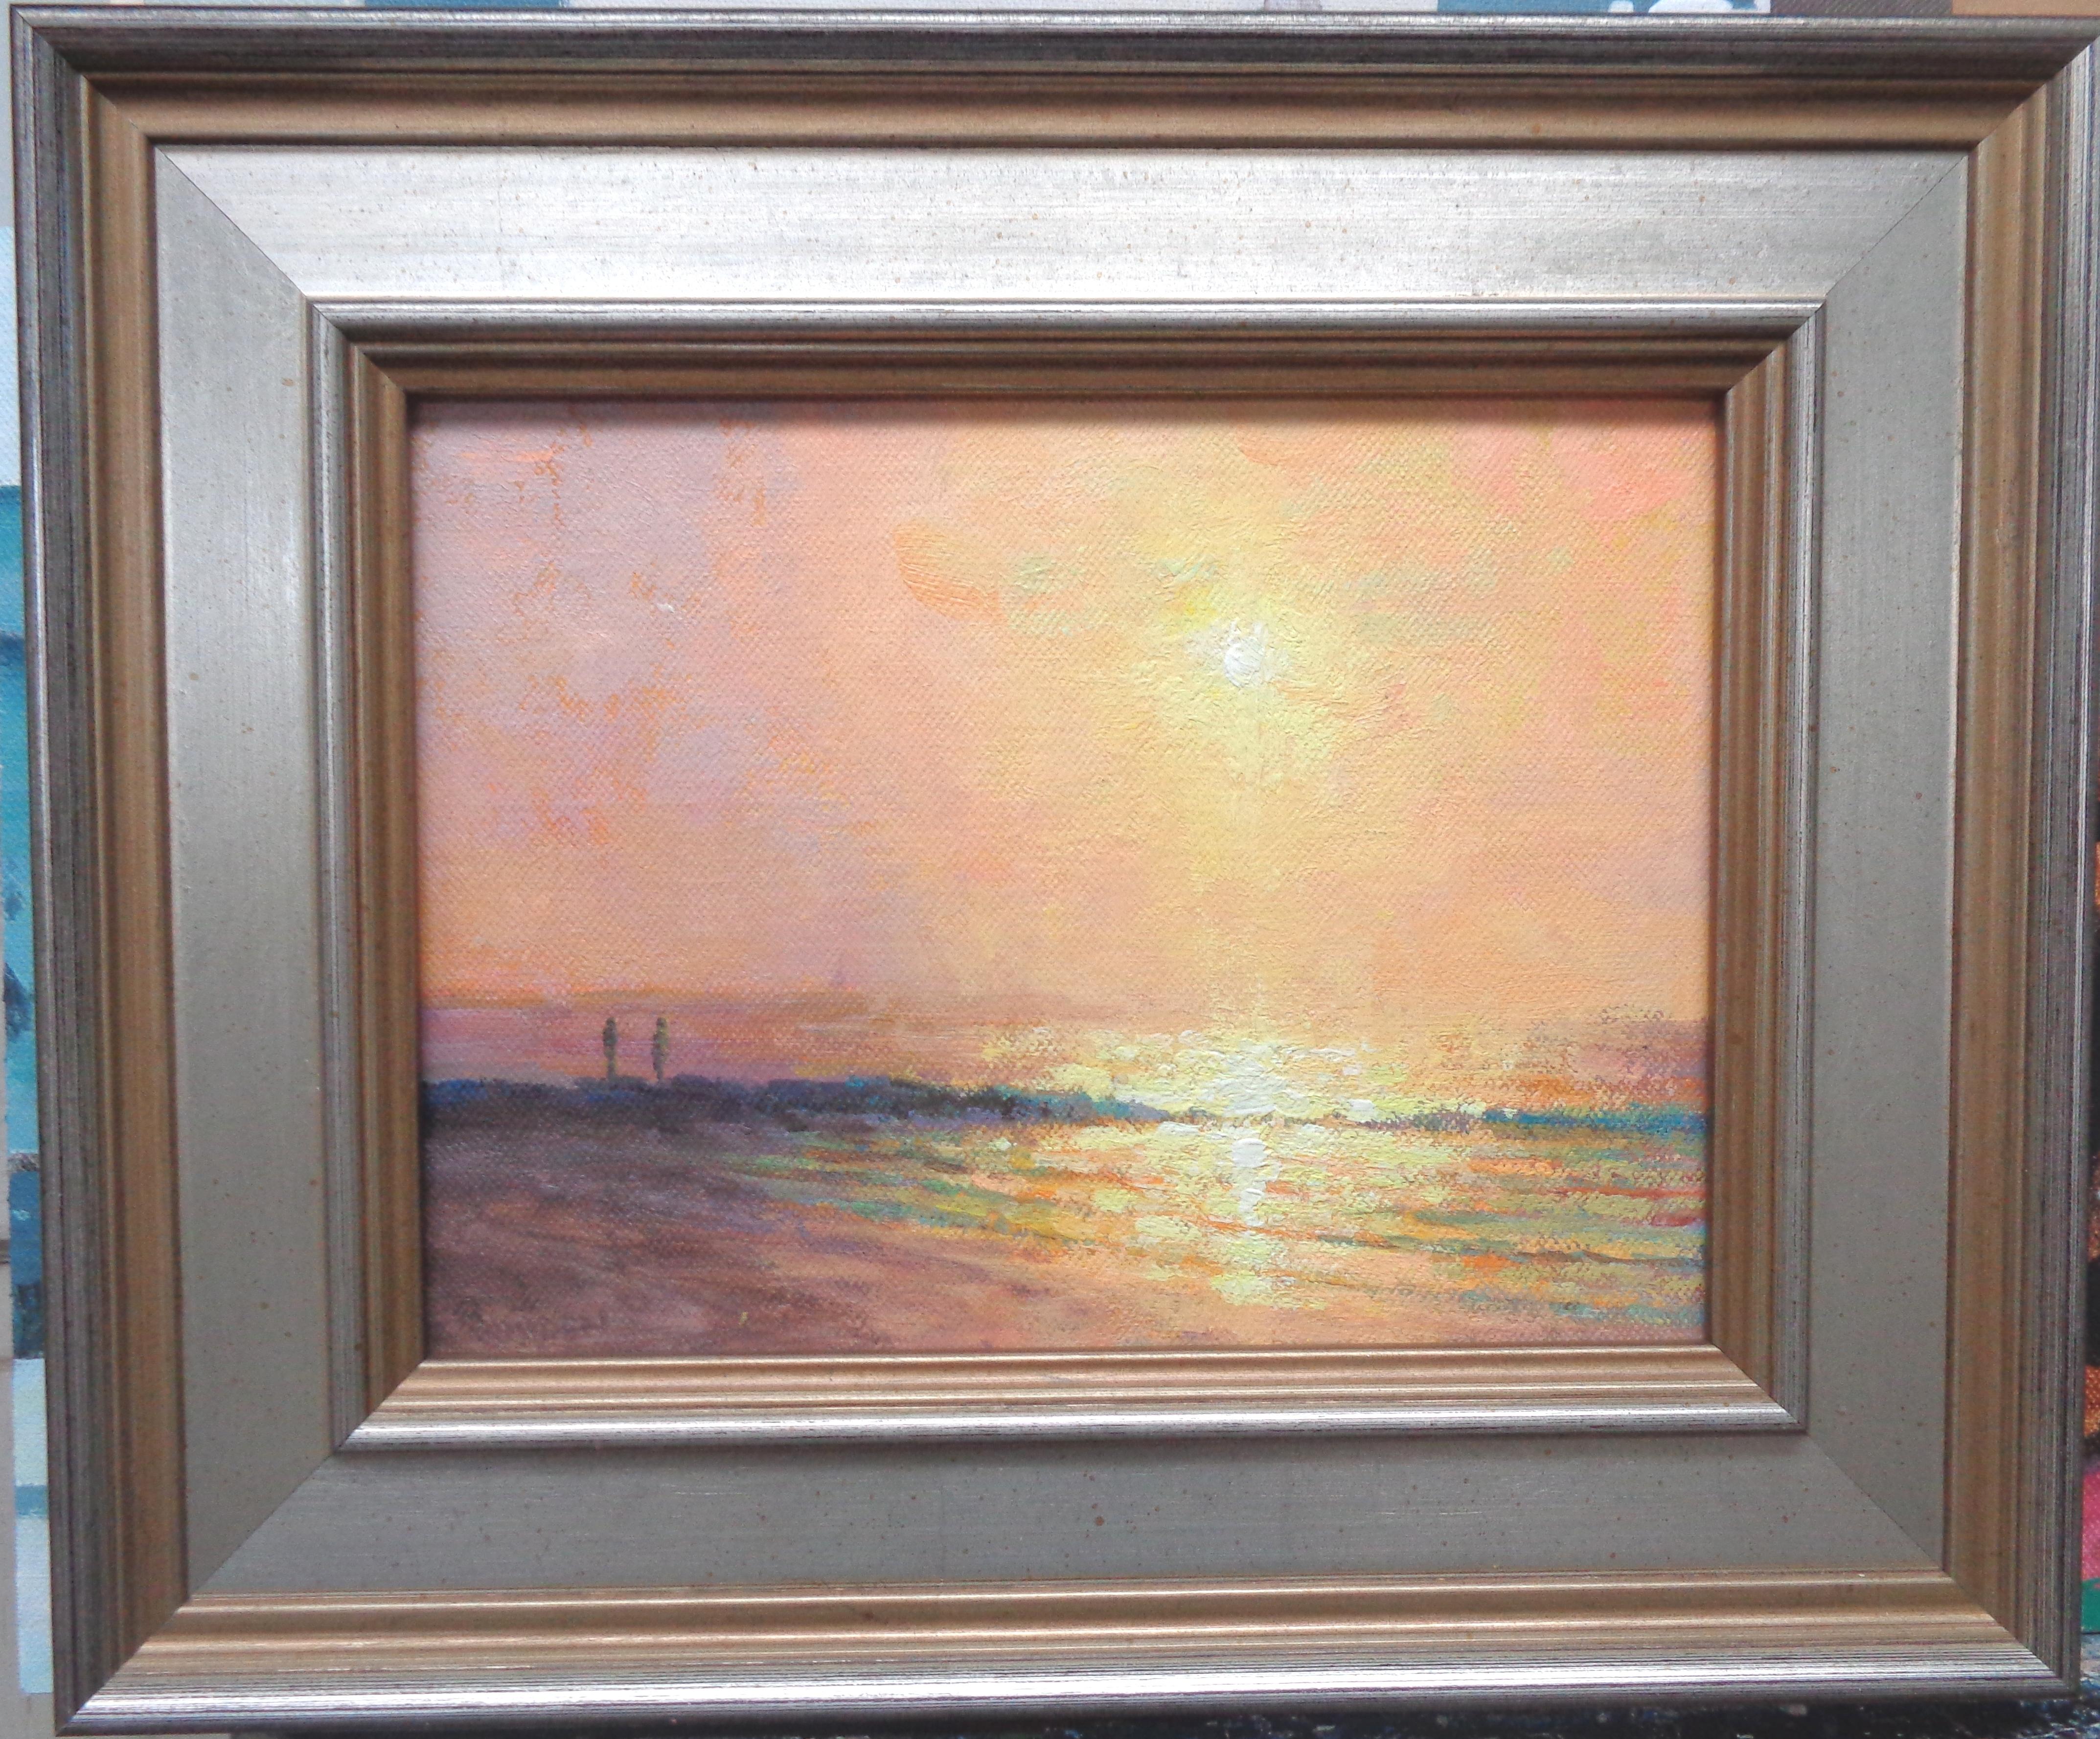 An oil painting on canvas by award winning contemporary artist Michael Budden that showcases a beautiful sunrise seascape created in an impressionistic realism style. The painting exudes the very rich qualities of color, and beautiful light that is